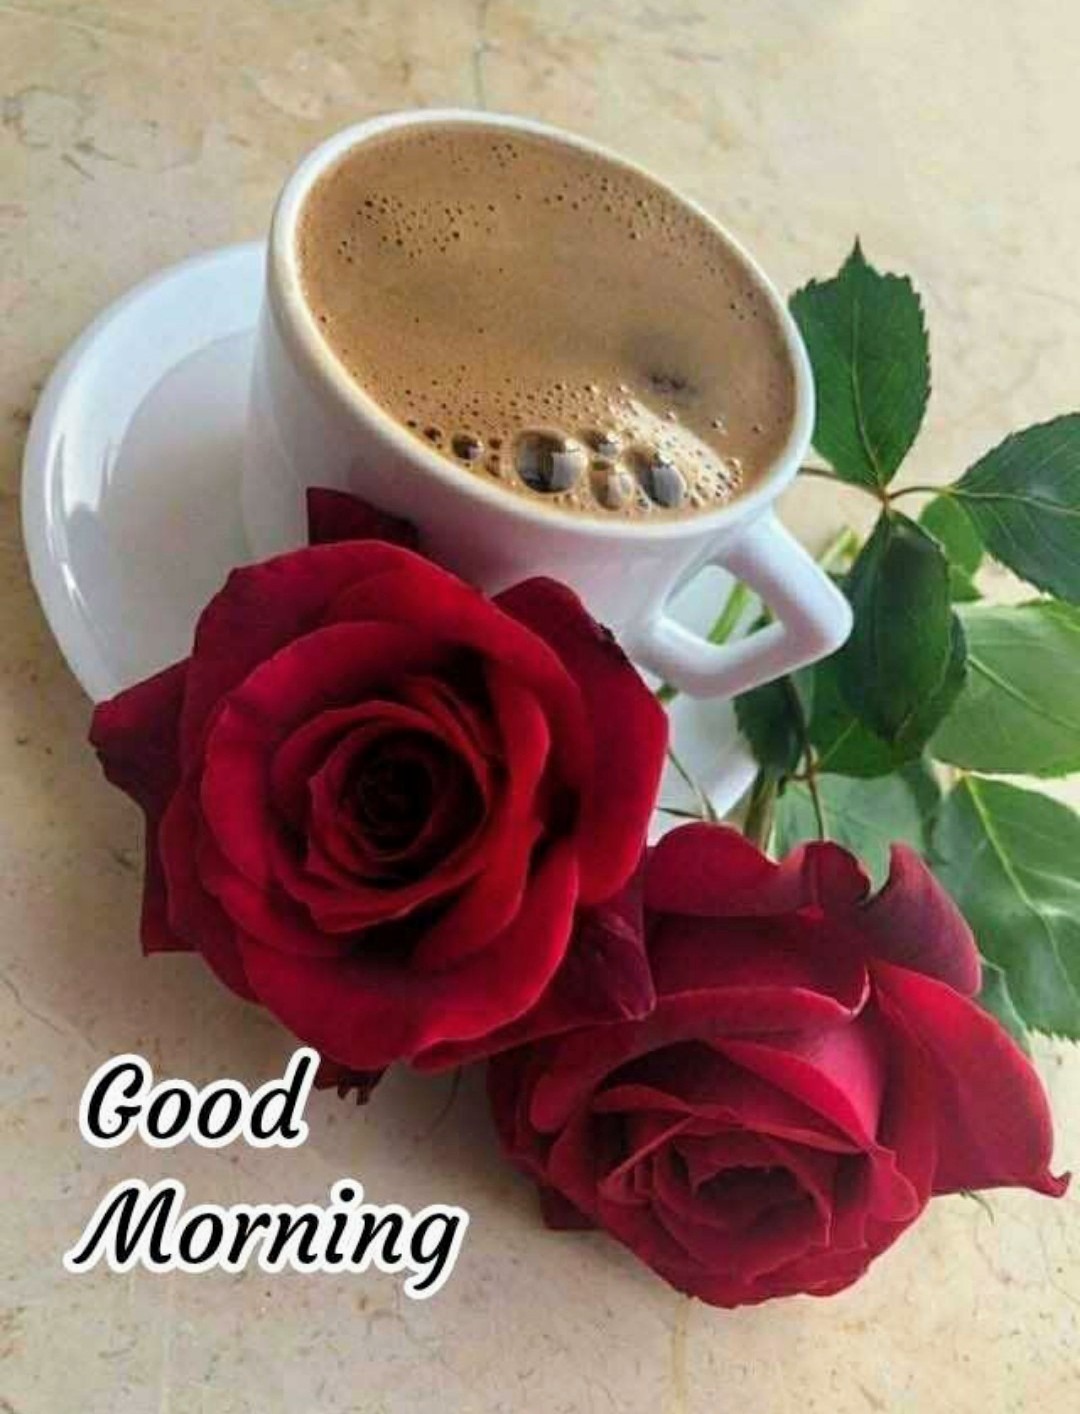 Good Morning With Roses - DesiComments.com